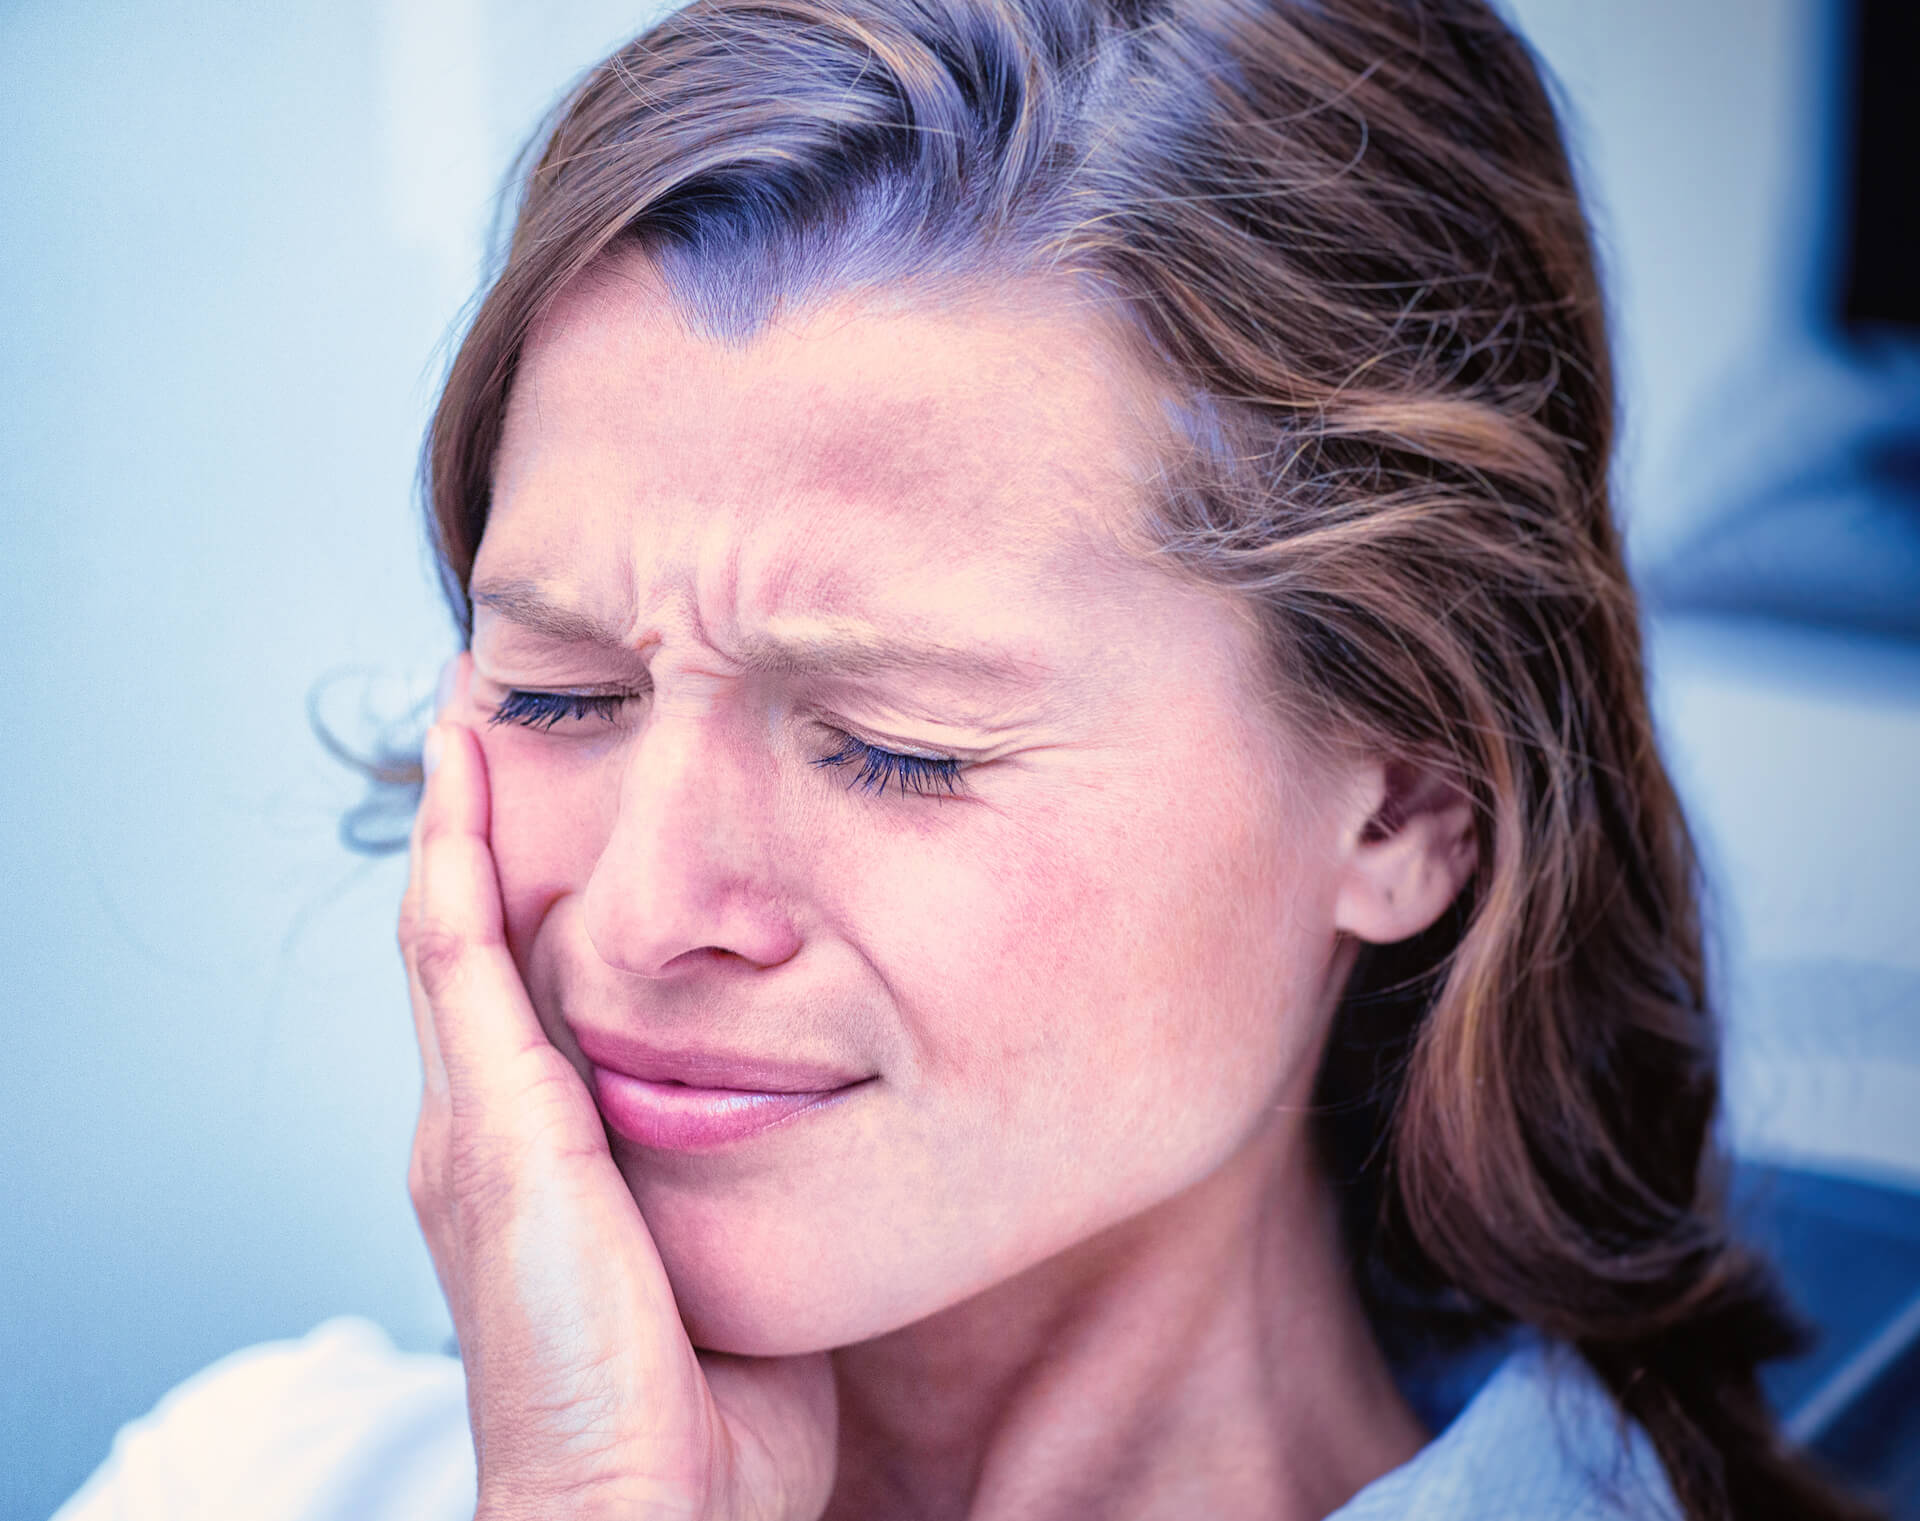 How Painful Is Tooth Extraction Without Anesthesia?